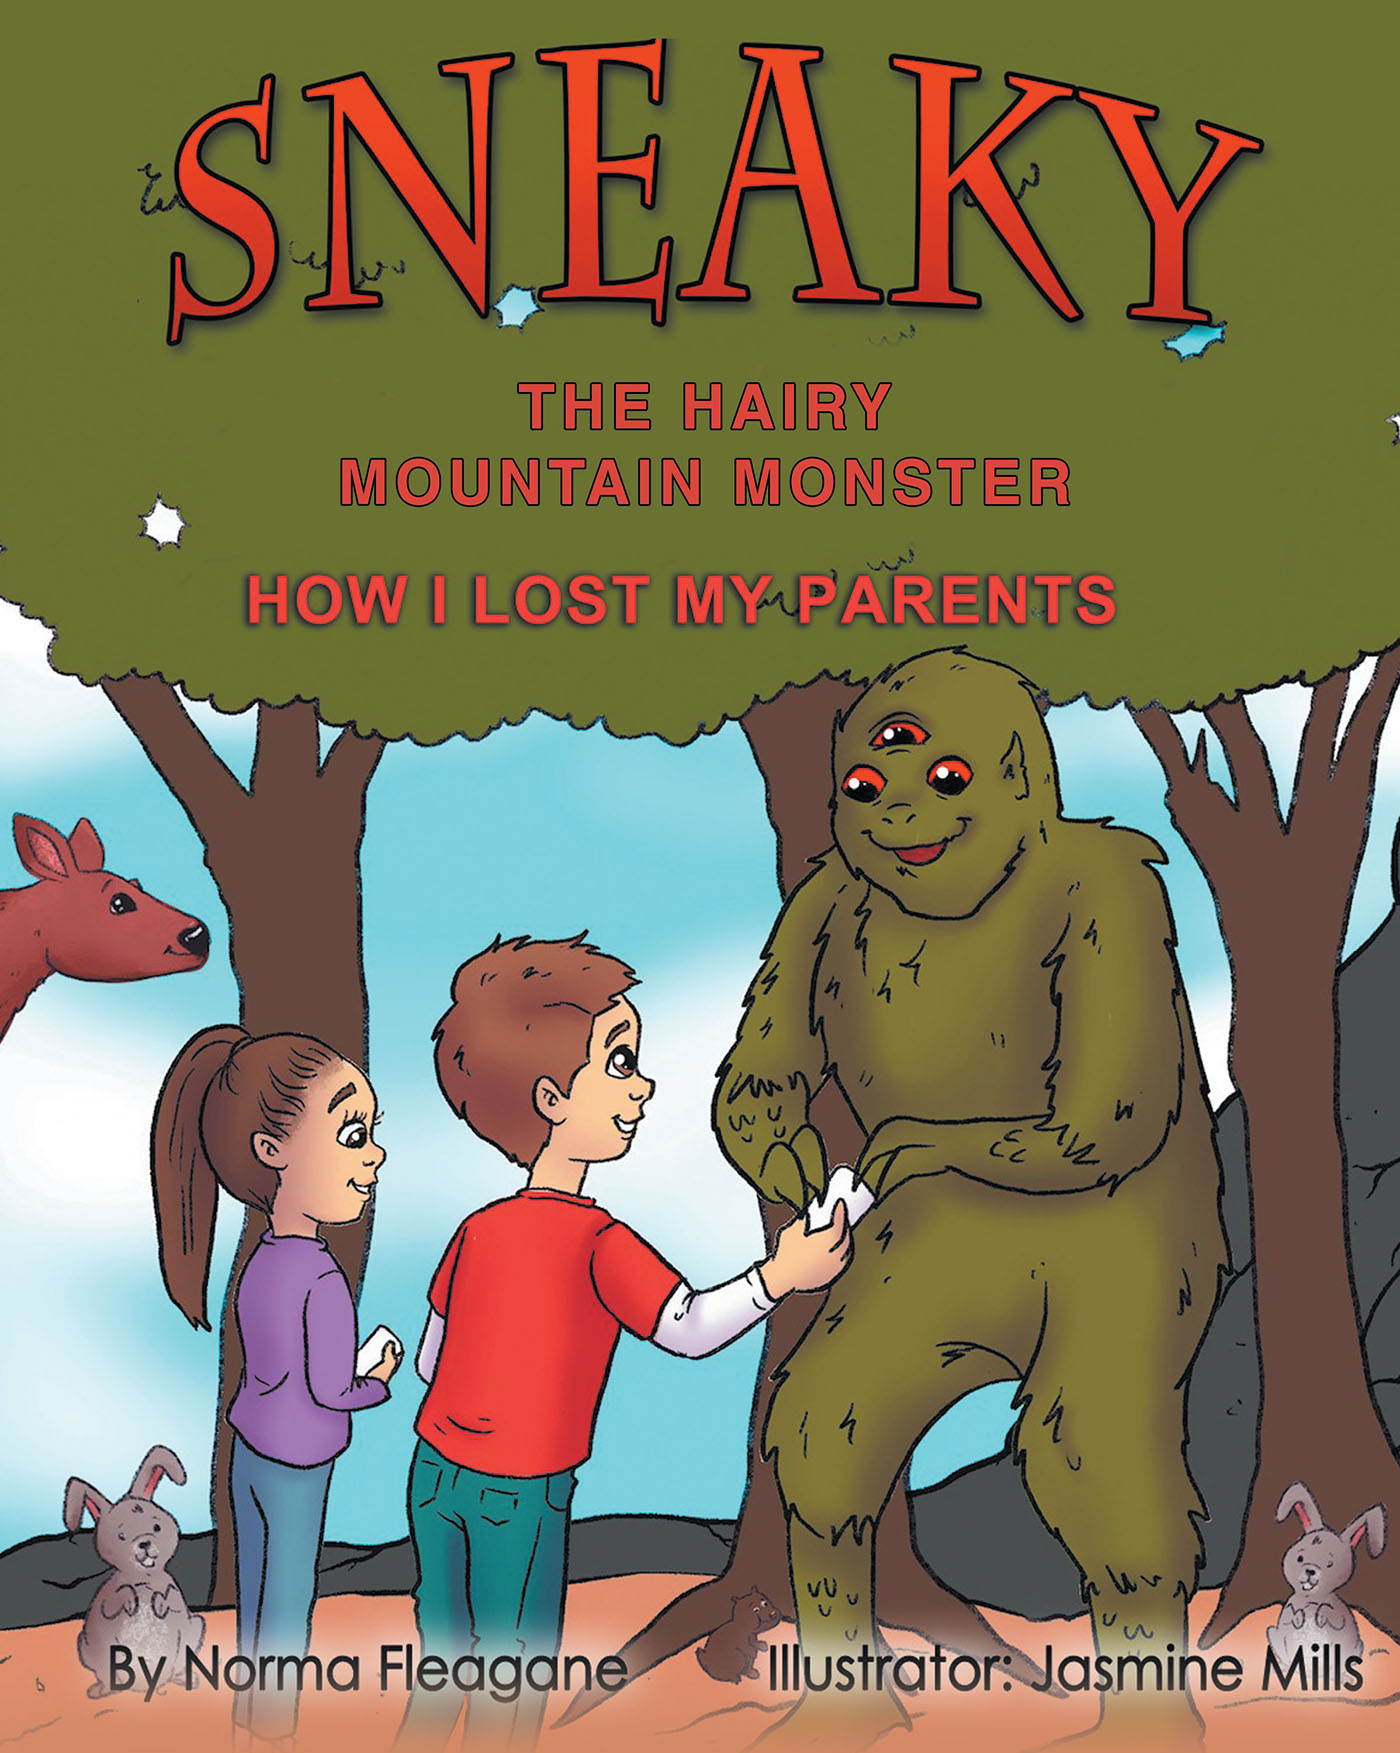 Norma Fleagane’s Newly Released "Sneaky the Hairy Mountain Monster: How I Lost My Parents" is a Creative Adventure of Unexpected Friendship